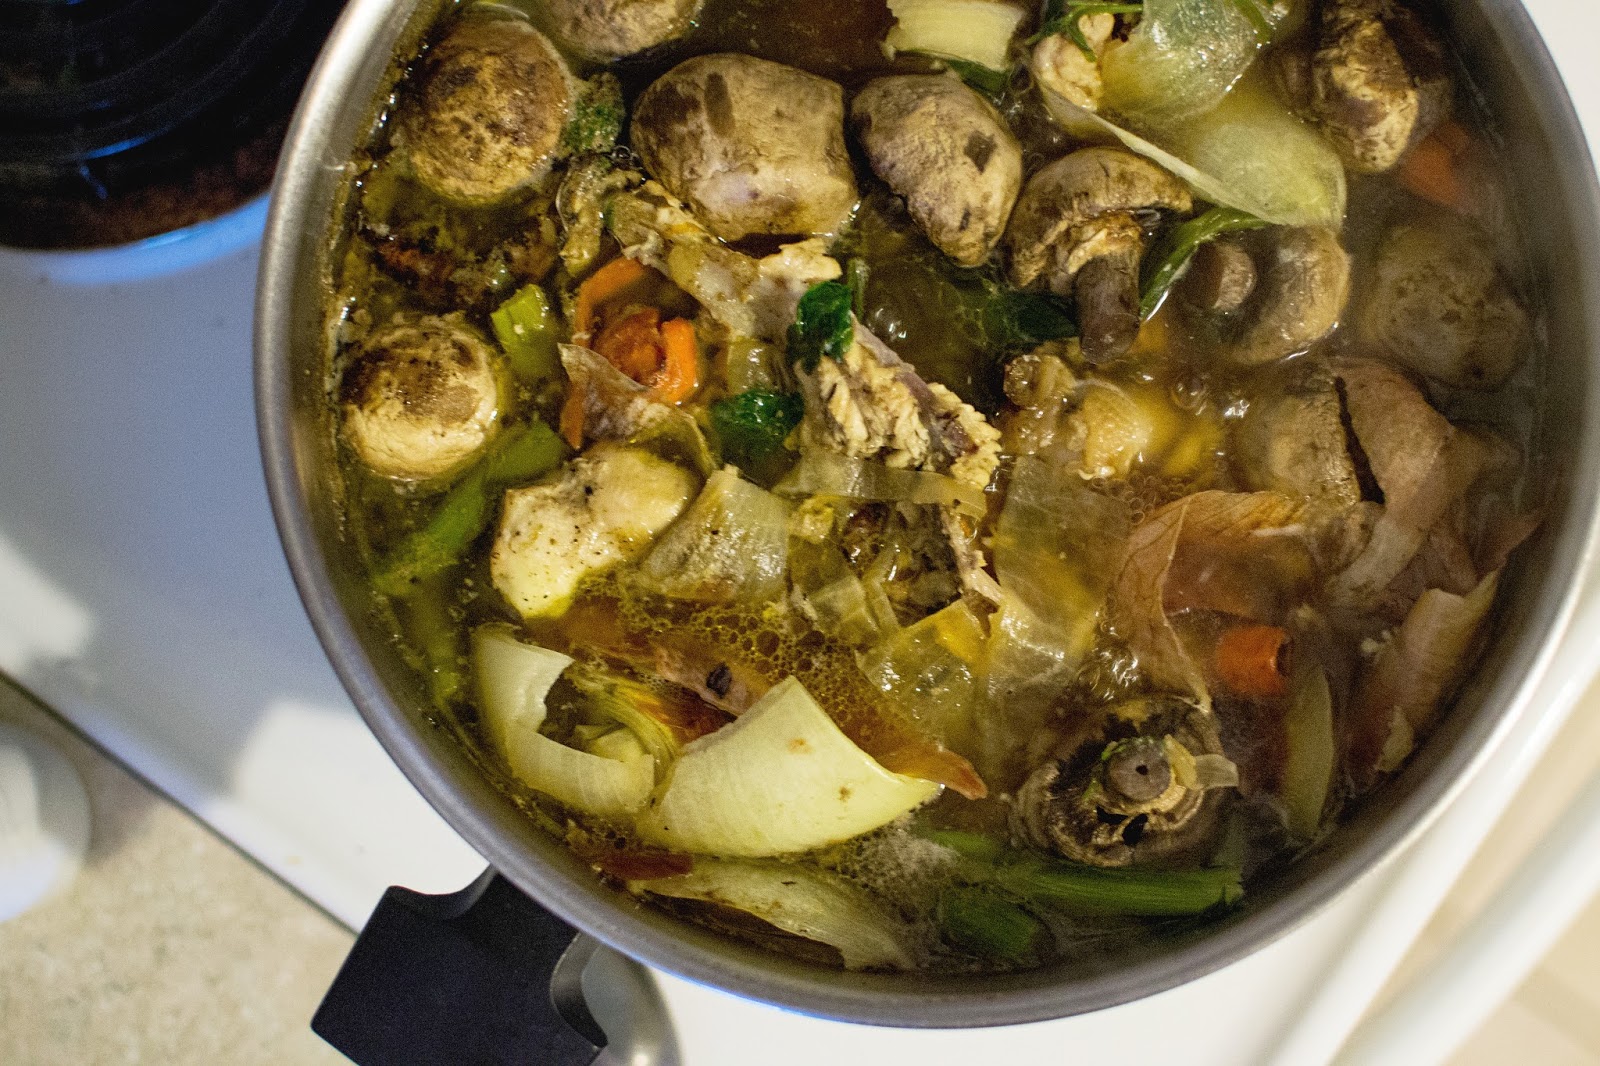 How to Make Your Own Foolproof Broth // This is a GREAT way to cut down on food waste!